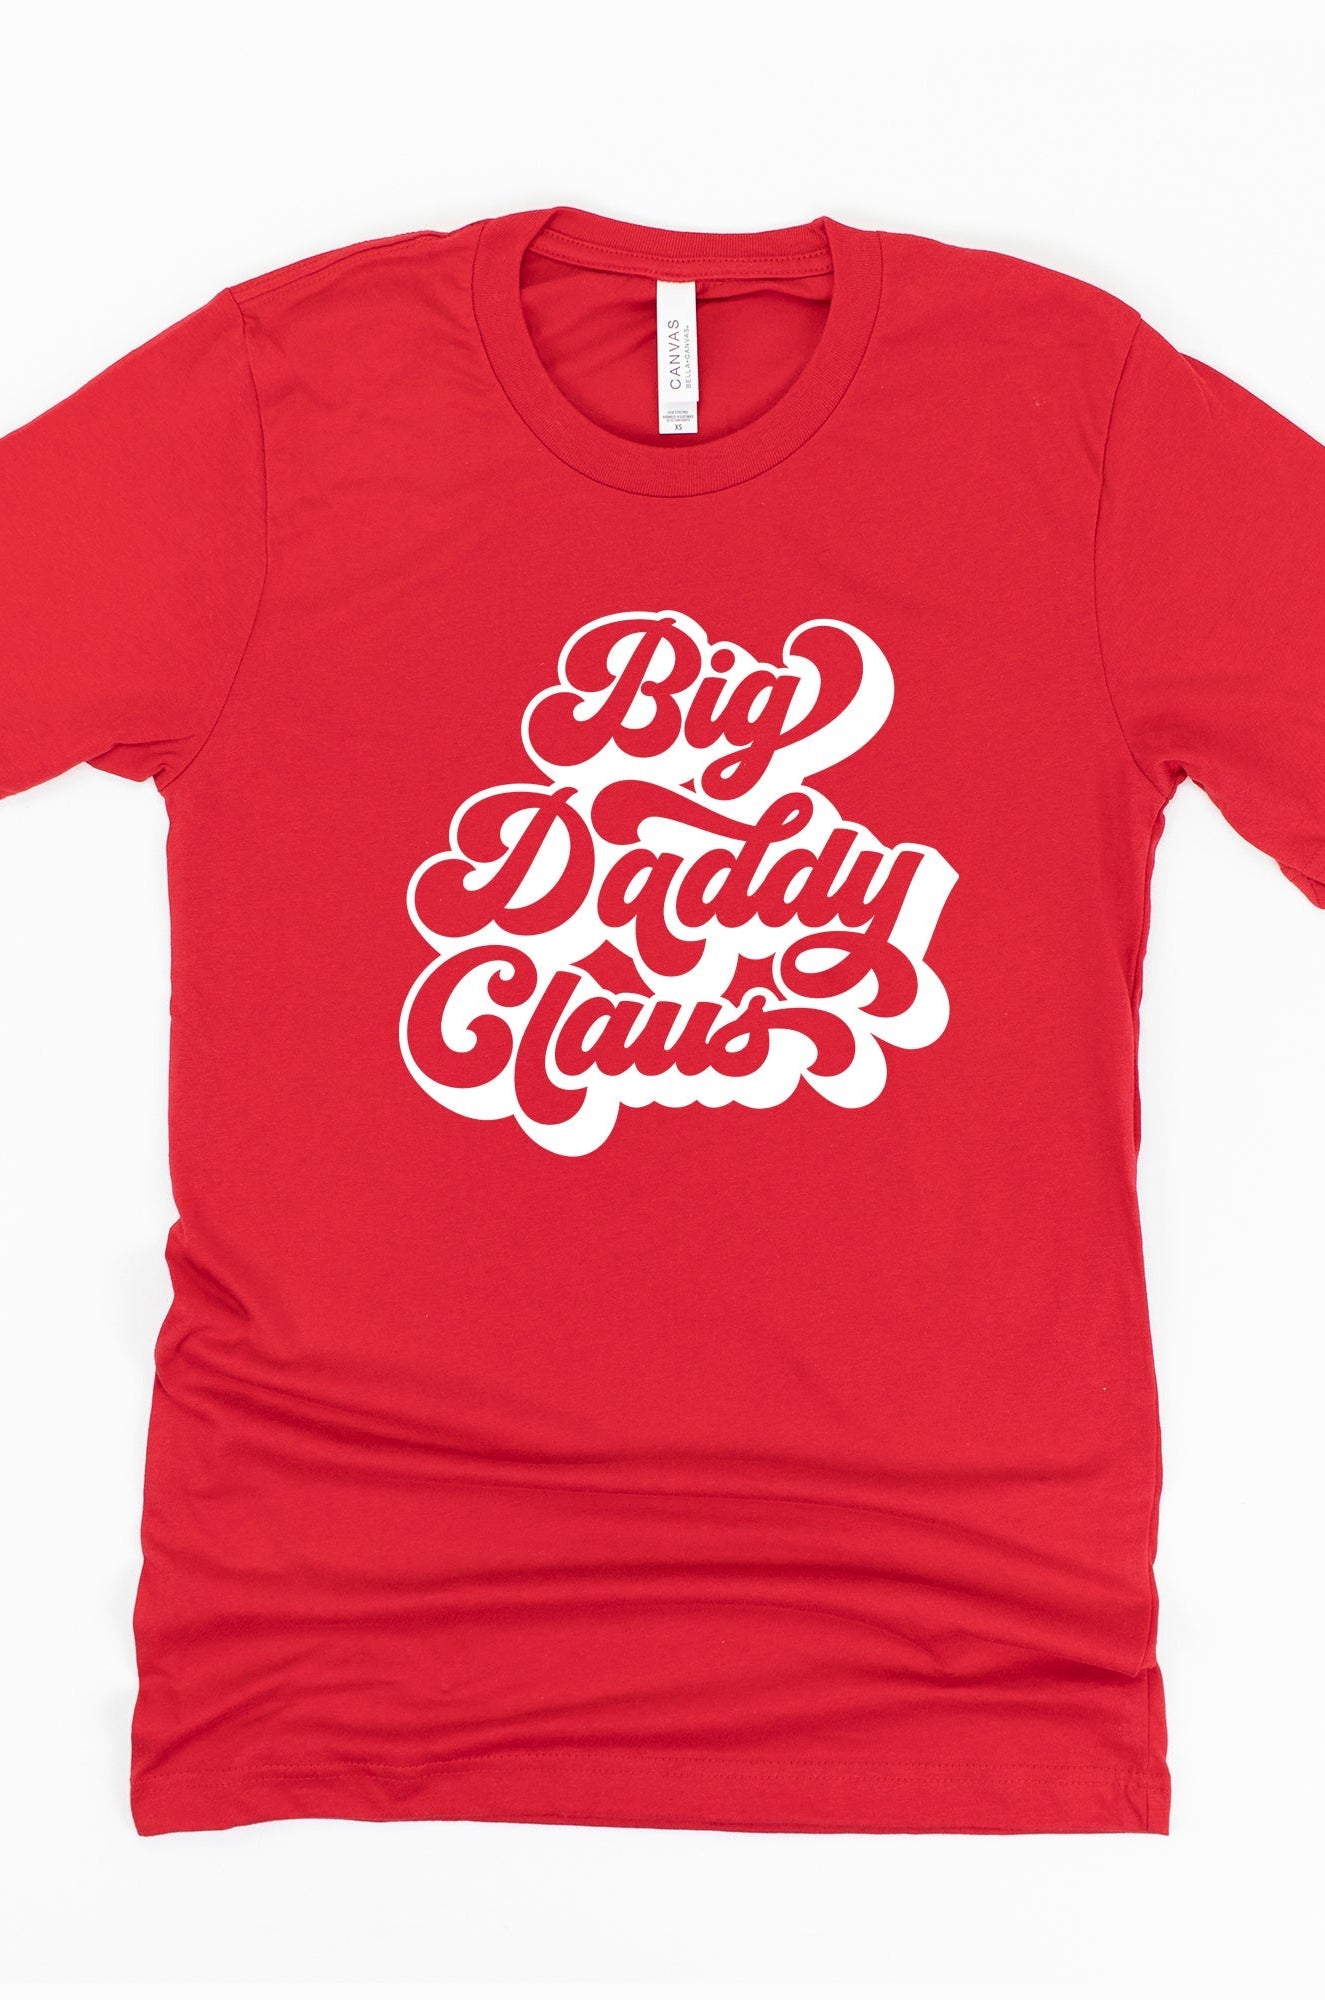 Big Daddy Claus | Short Sleeve Crew Neck Olive and Ivory Retail